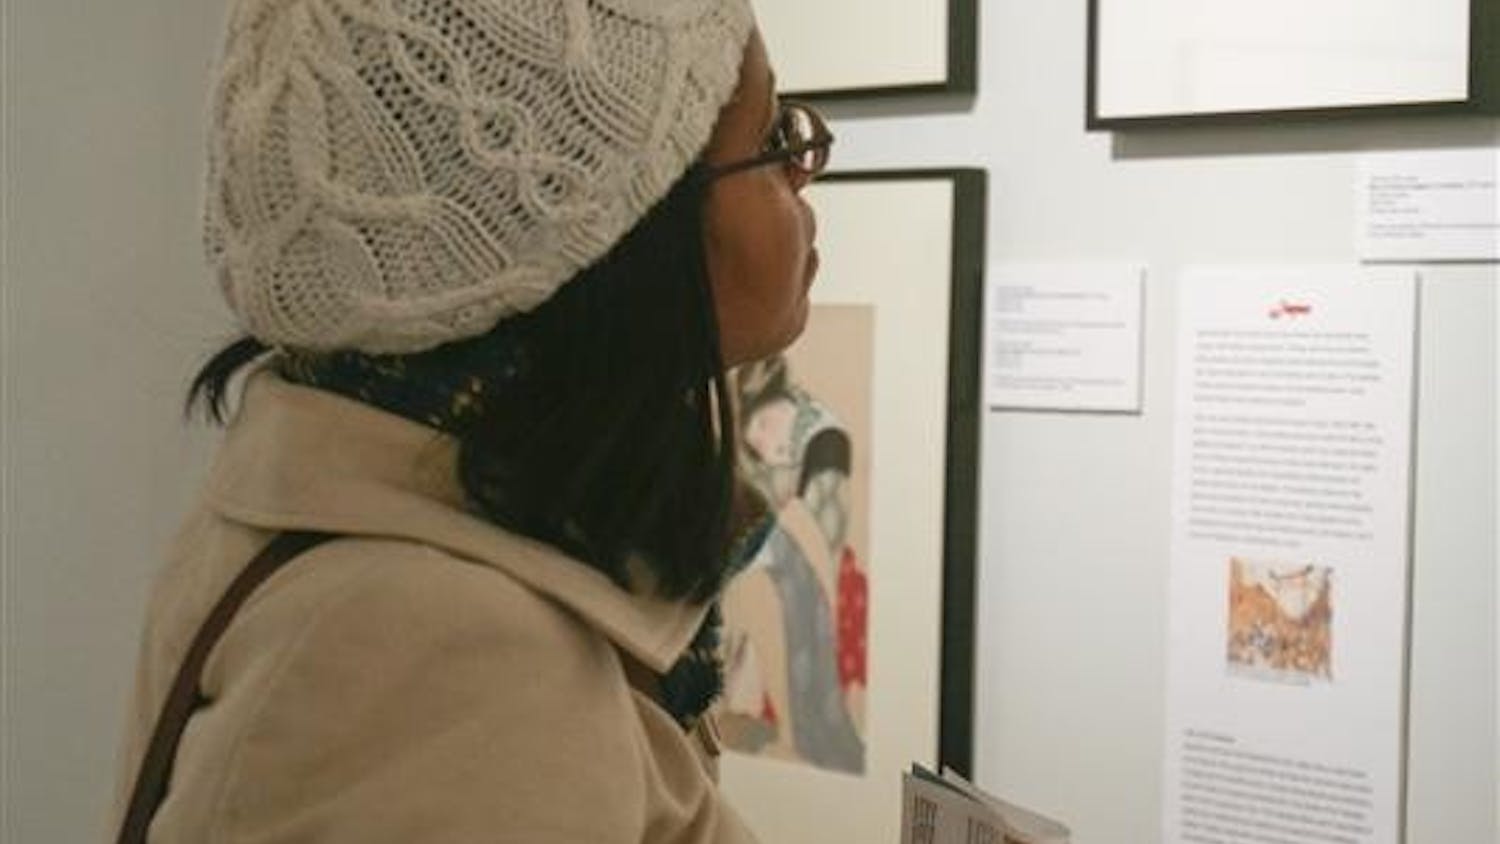 Graduate student Nikole Miller looks at pieces of featured artwork Friday evening at the Kinsey Institute's exhibit "Eros in Asia: Erotic Art from Iran to Japan." The exhibit will be on display until June 26.